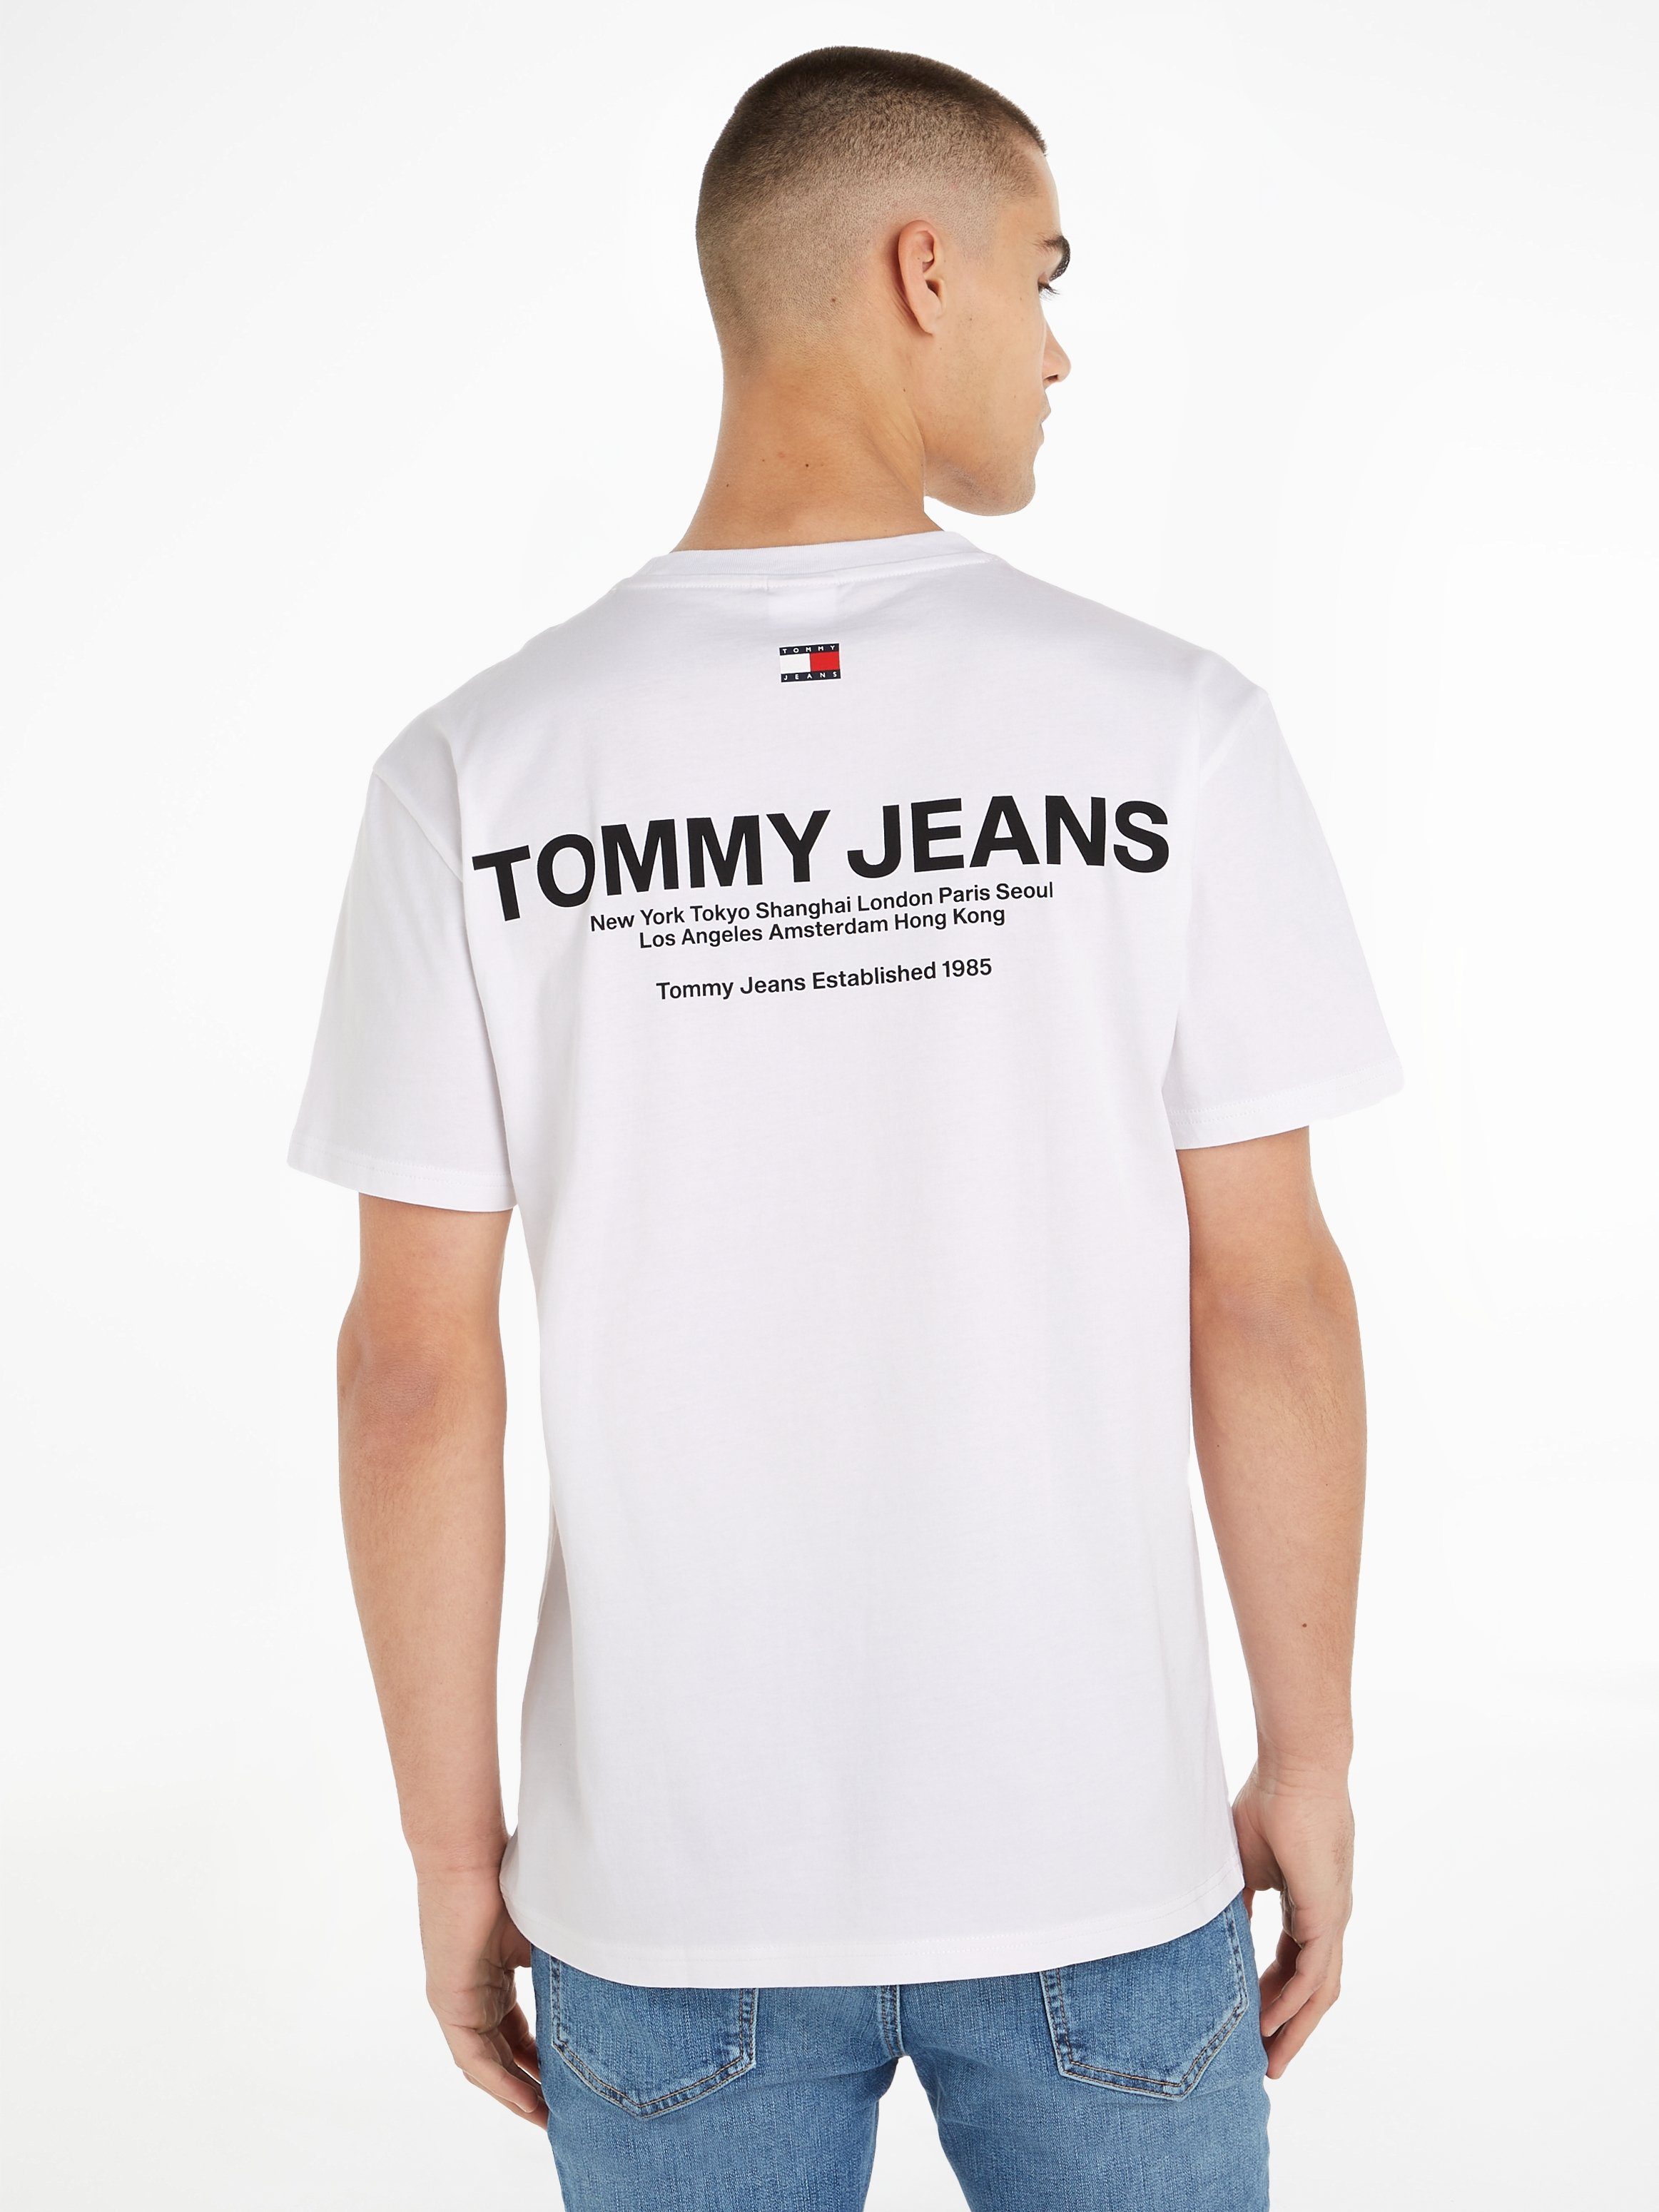 TEE LINEAR TJM Jeans PRINT BACK White T-Shirt Tommy CLSC